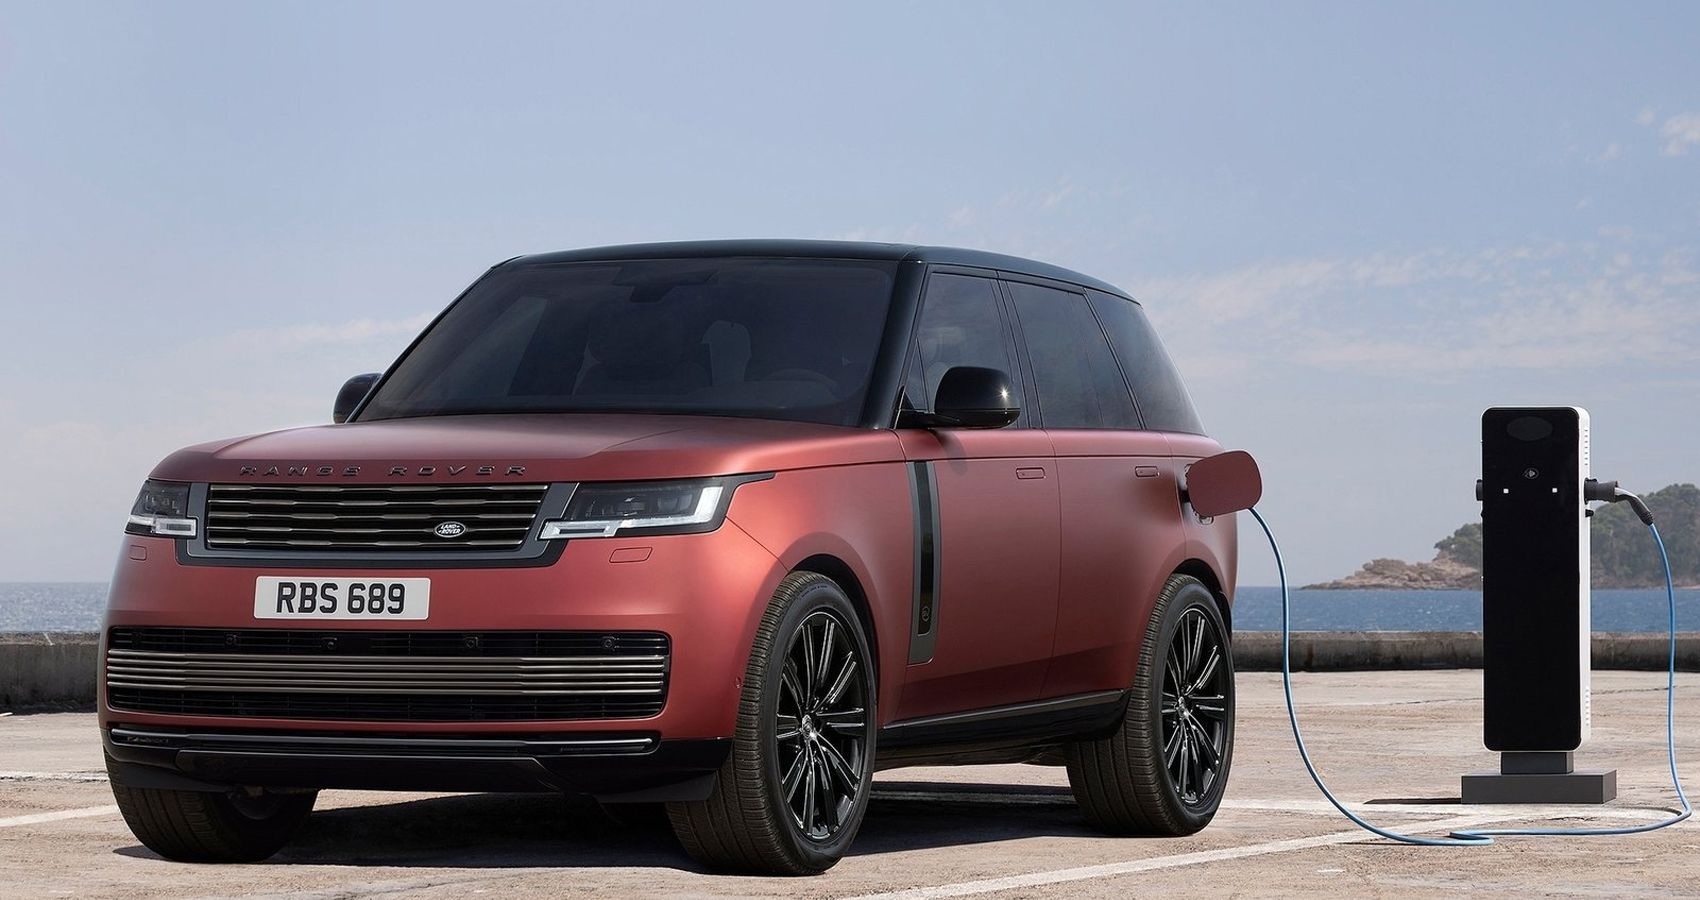 The front of the new Range Rover, plugged in